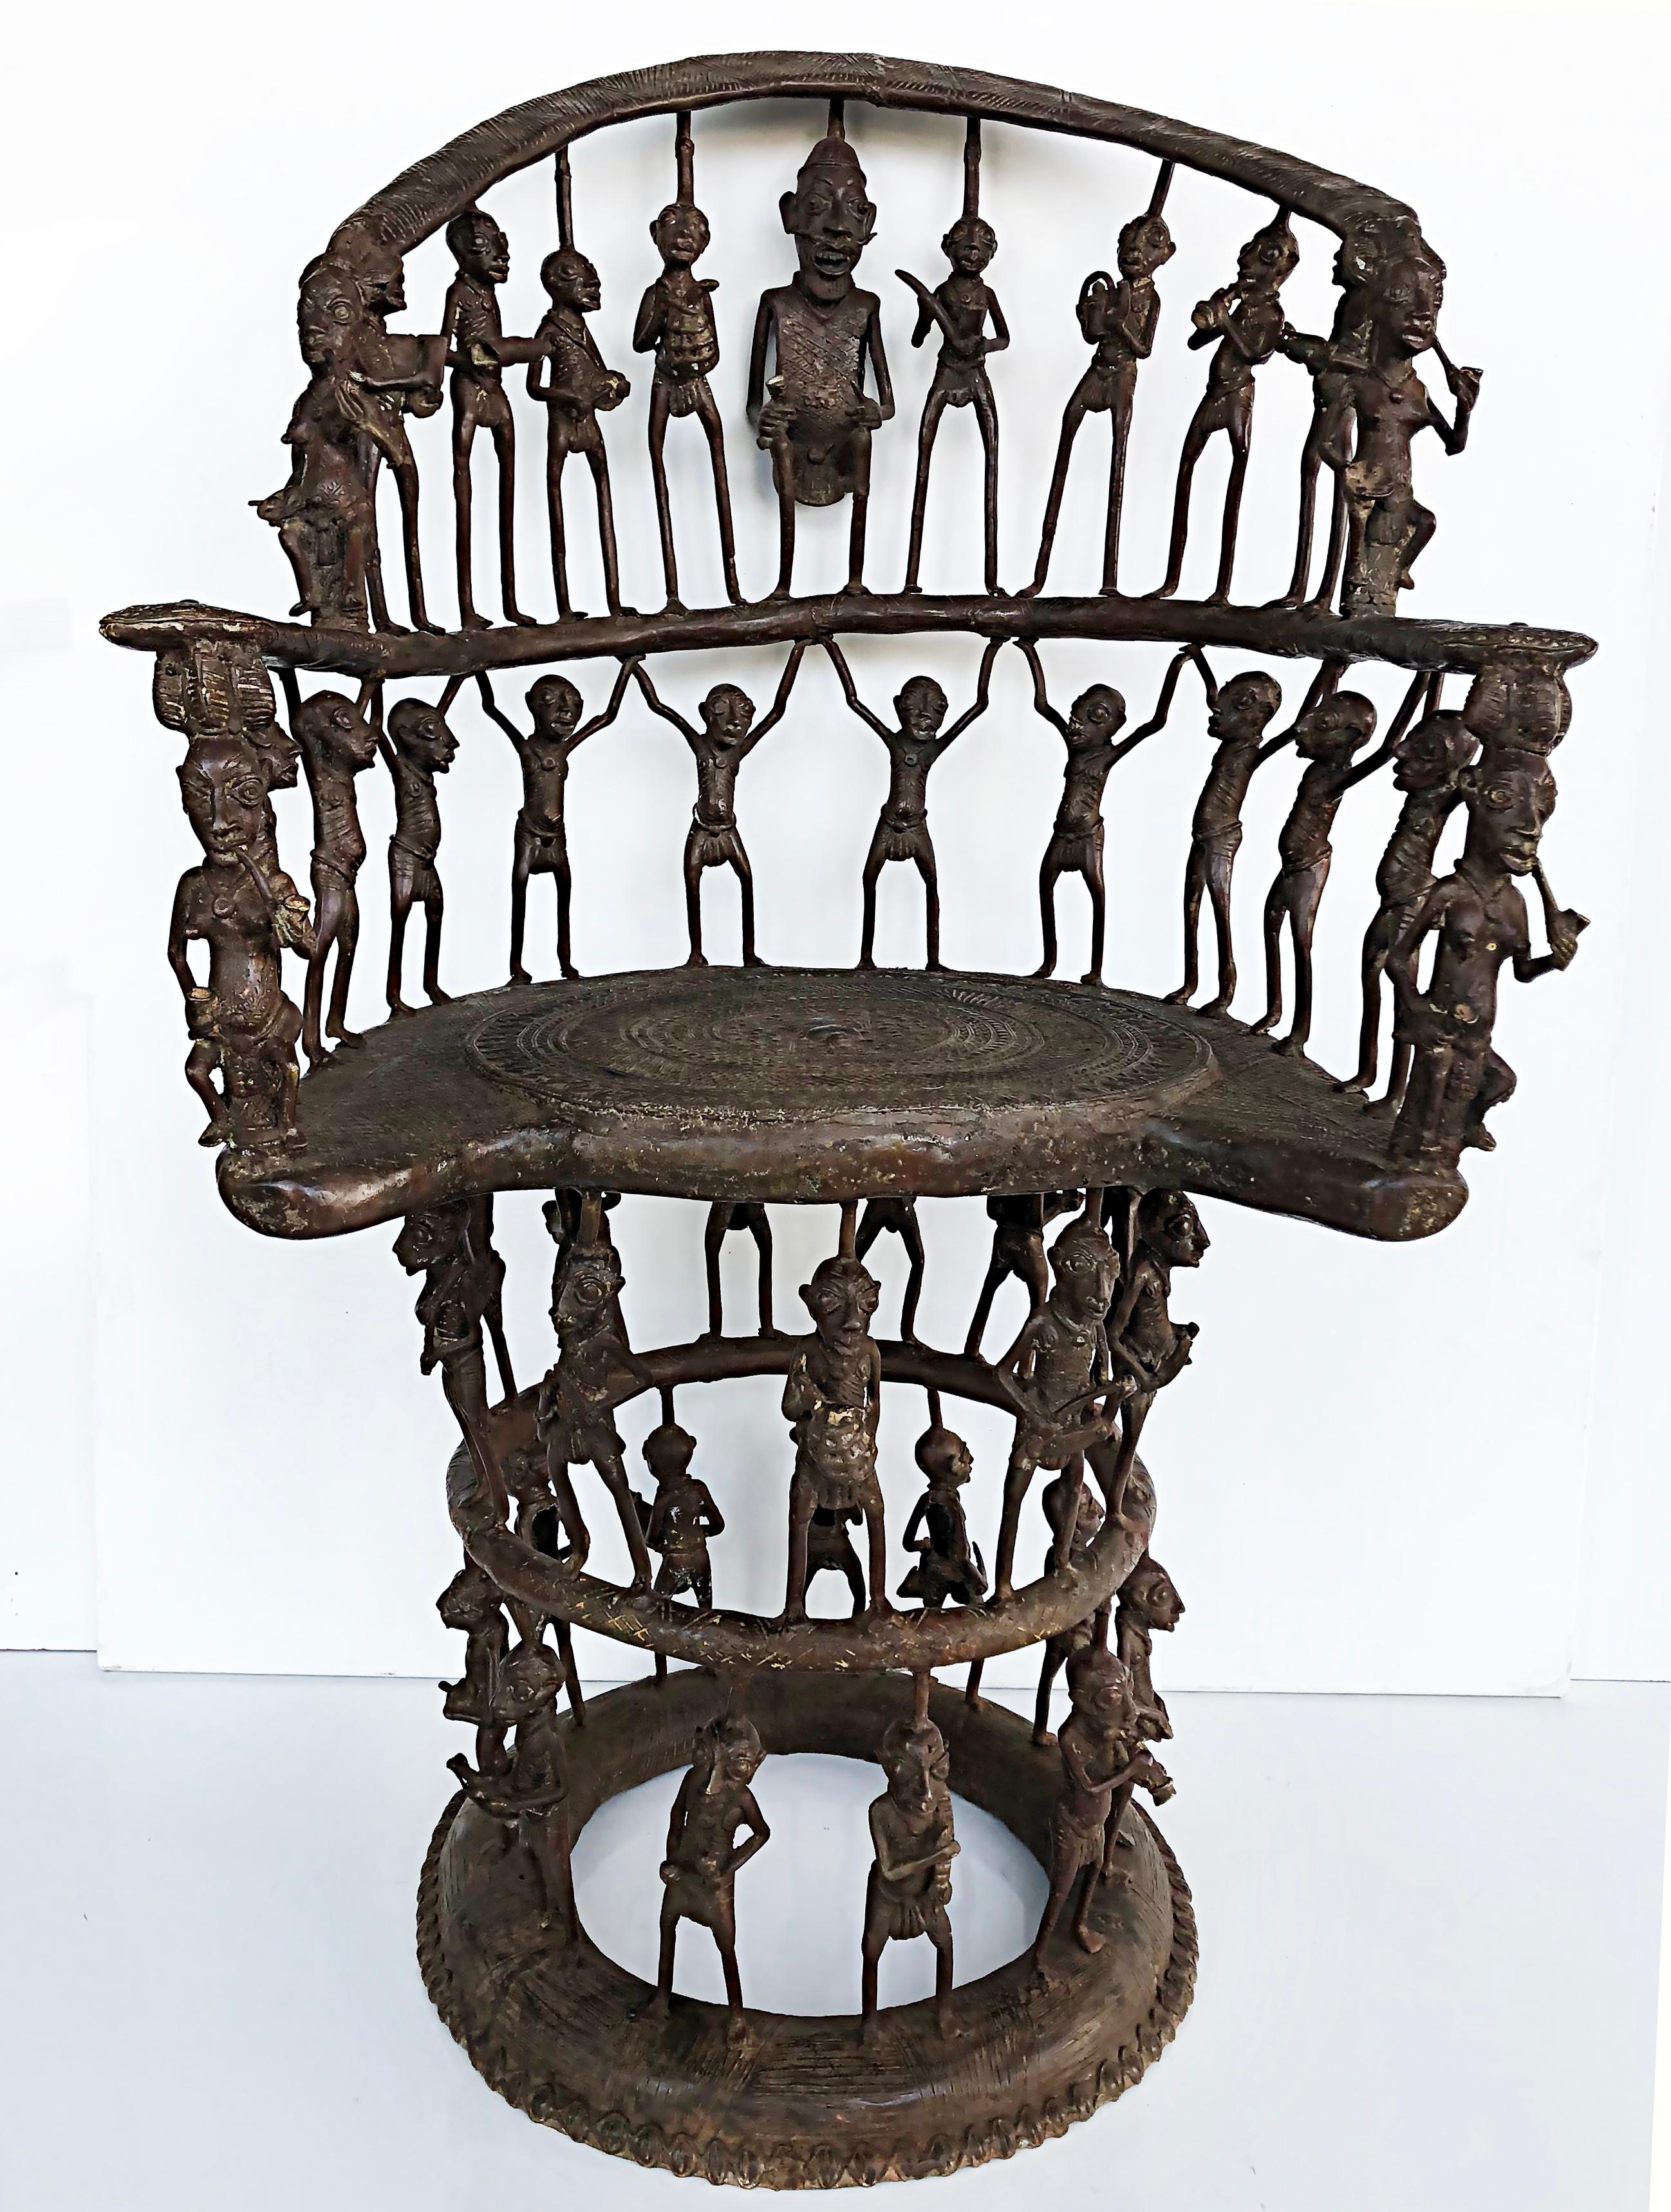 Rare African Cameroon Bronze Figurative Throne Chair, 20th Century For Sale 1